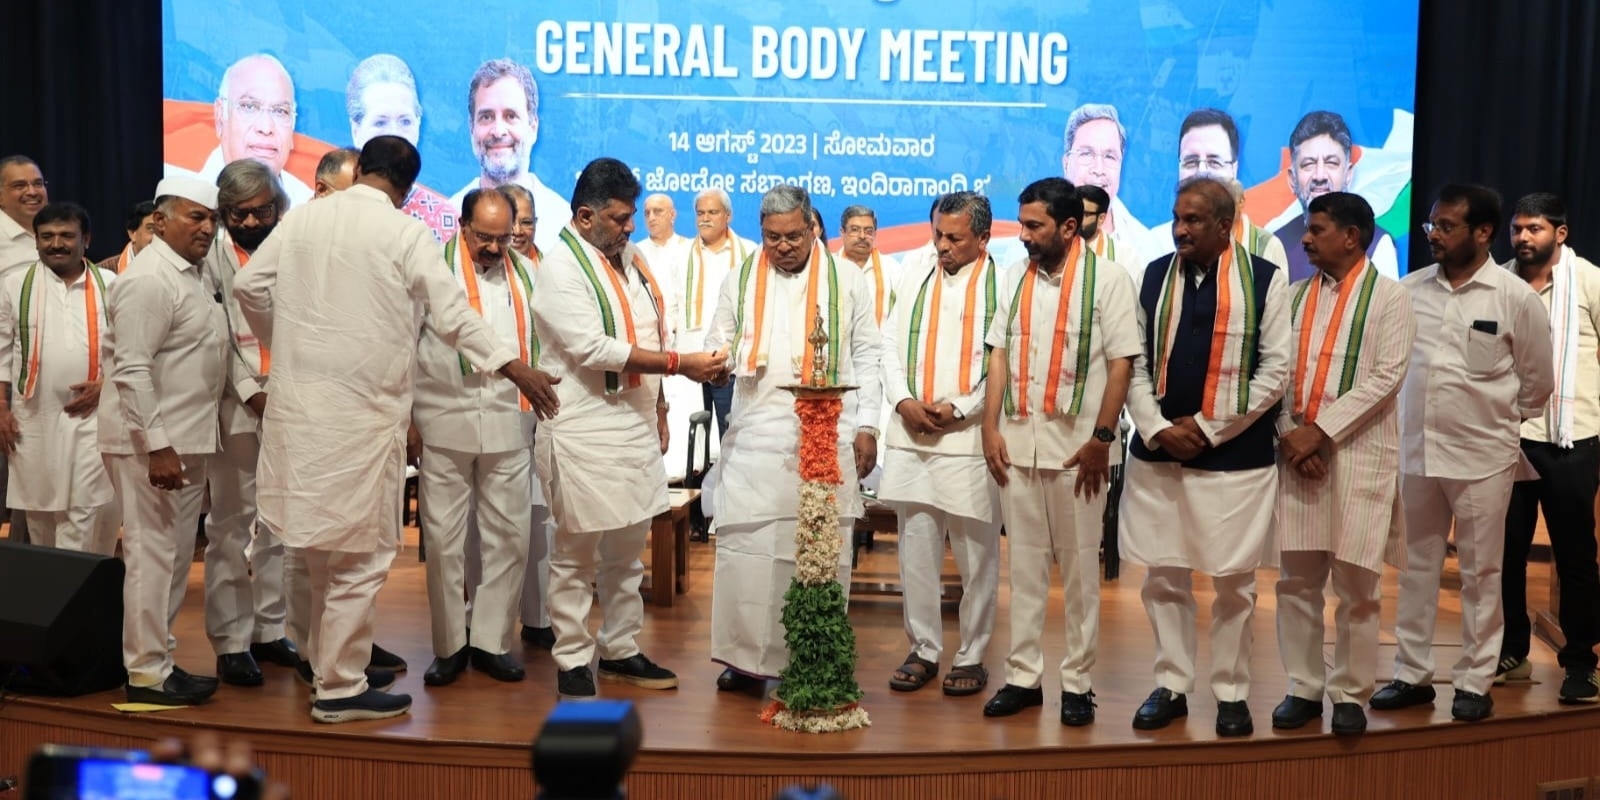 Karnataka Congress leaders at the party's General Body Meeting in Bengaluru on Monday, 14 August, 2023.